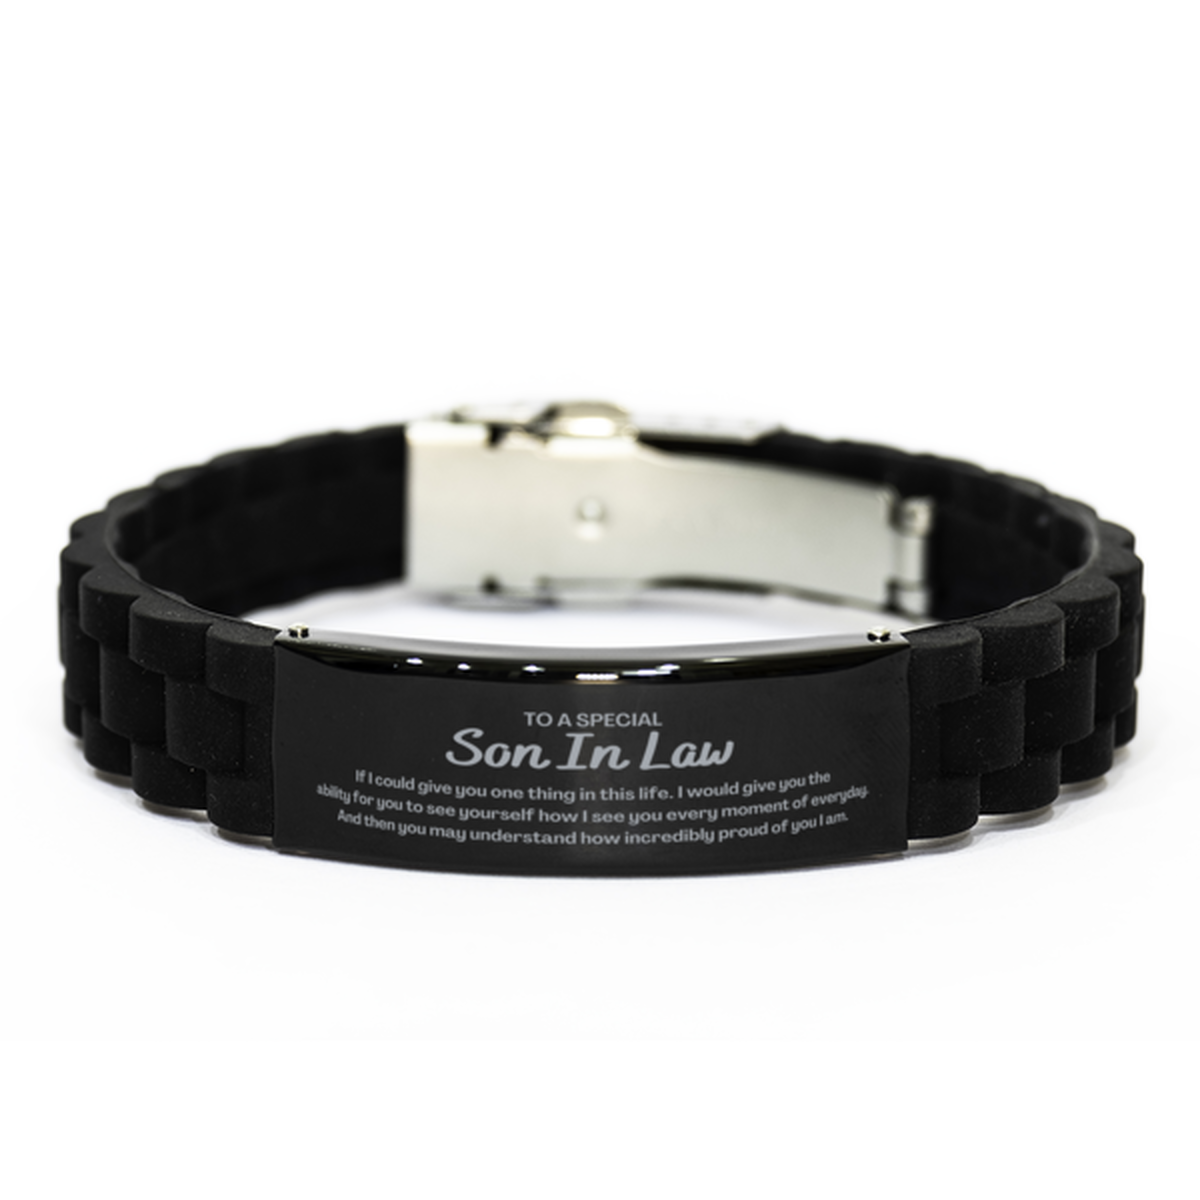 To My Son In Law Black Glidelock Clasp Bracelet, Gifts For Son In Law Engraved, Inspirational Gifts for Christmas Birthday, Epic Gifts for Son In Law To A Special Son In Law how incredibly proud of you I am